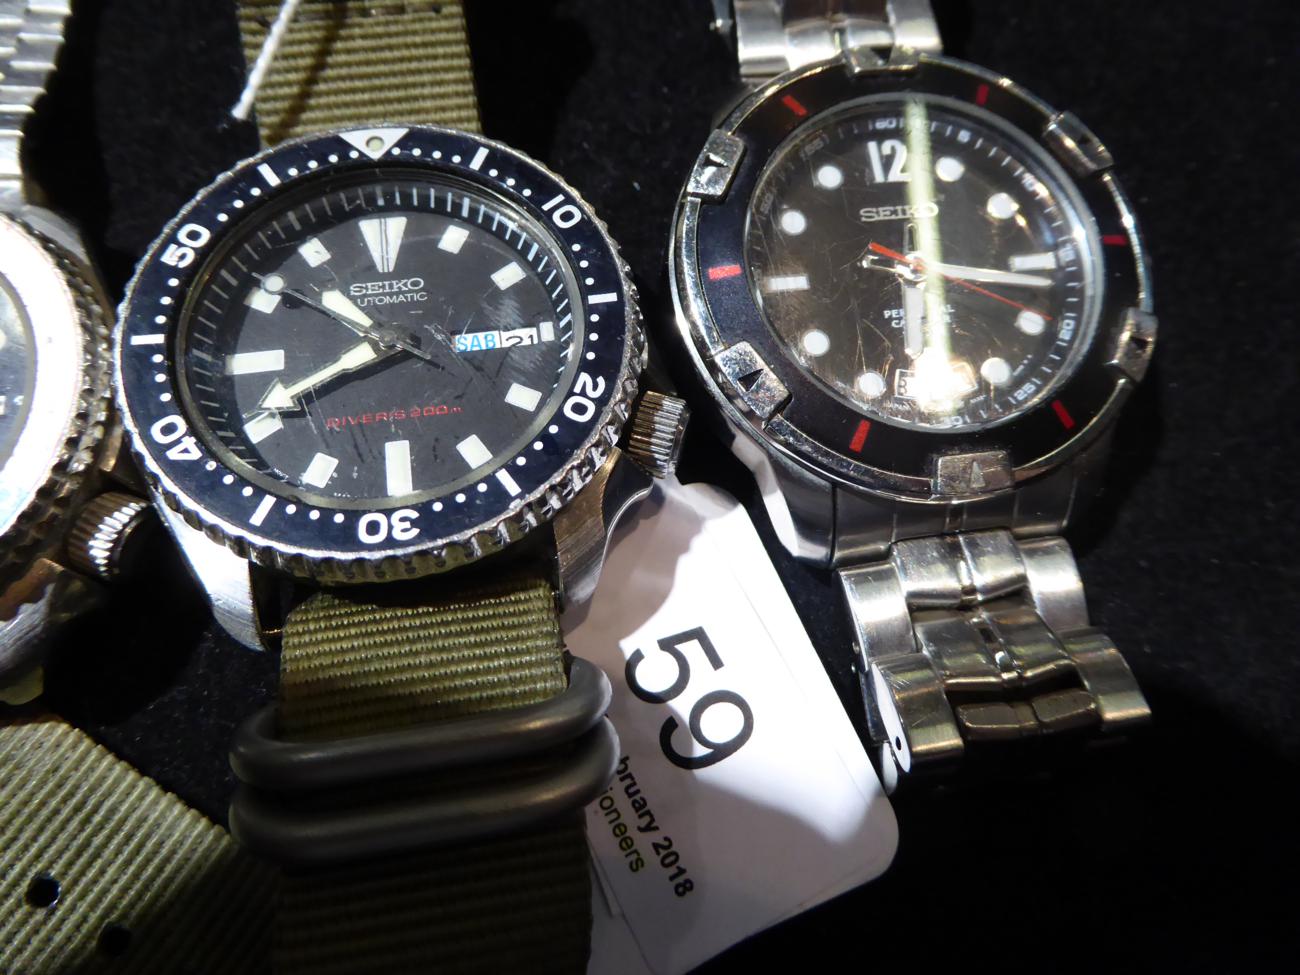 Three Seiko wristwatches, two with quartz movement and an automatic movement (3) - Image 2 of 4